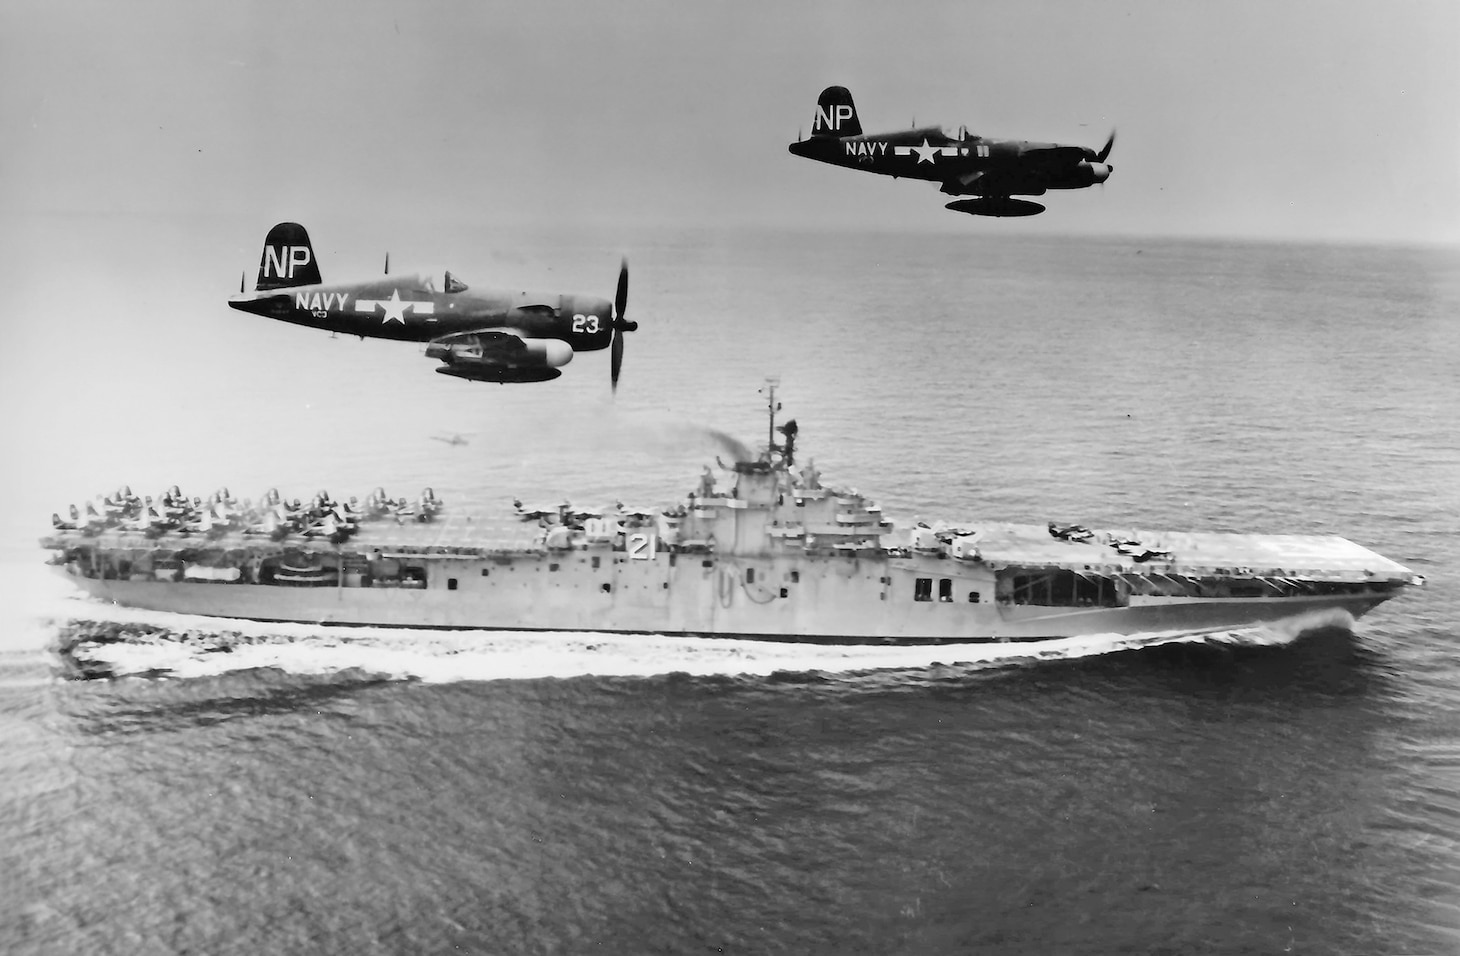 F4U-5N Corsairs of VC-3 return from a mission to the USS Boxer (CV 21) on Sept. 4, 1951. The carrier joined operations with Task Force 77 in March 1951 with the first Naval Air Reserve squadrons to fly strikes during the Korean War, most of which were strikes against Chinese ground forces along the 38th Parallel. This model of the long-lived Corsair was a night fighter and its missions were often after dark against enemy supply lines, truck convoys and trains, using napalm, various iron bombs and unguided rockets. Note the aircraft on the flight deck waiting to be launched on another mission. Just barely visible below Corsair No. 23, a helicopter hovers off the Boxer’s port side to perform rescue duties.